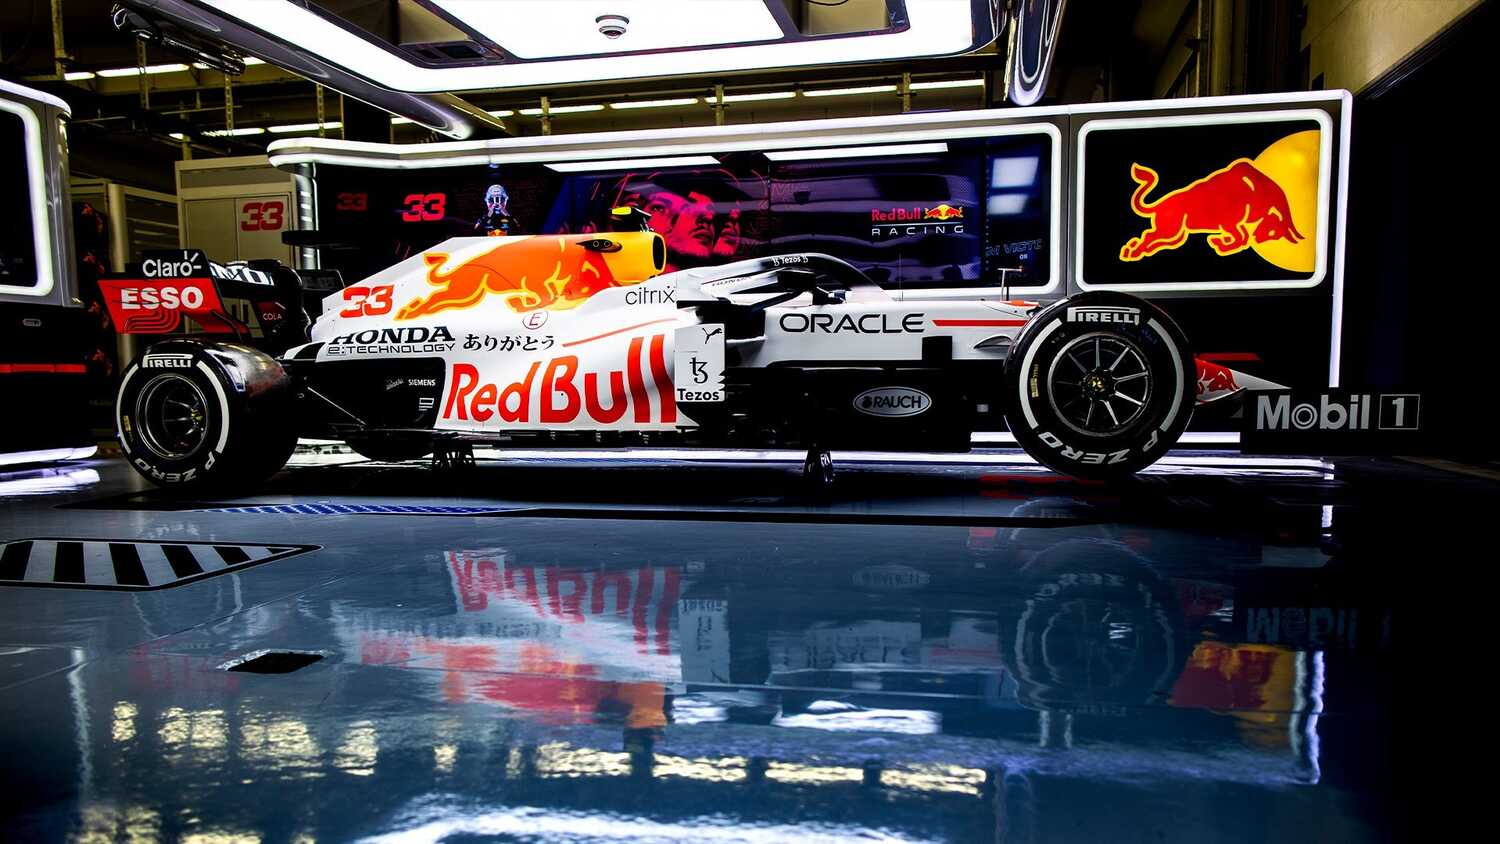 Photos: All angles of Red Bull's special livery!